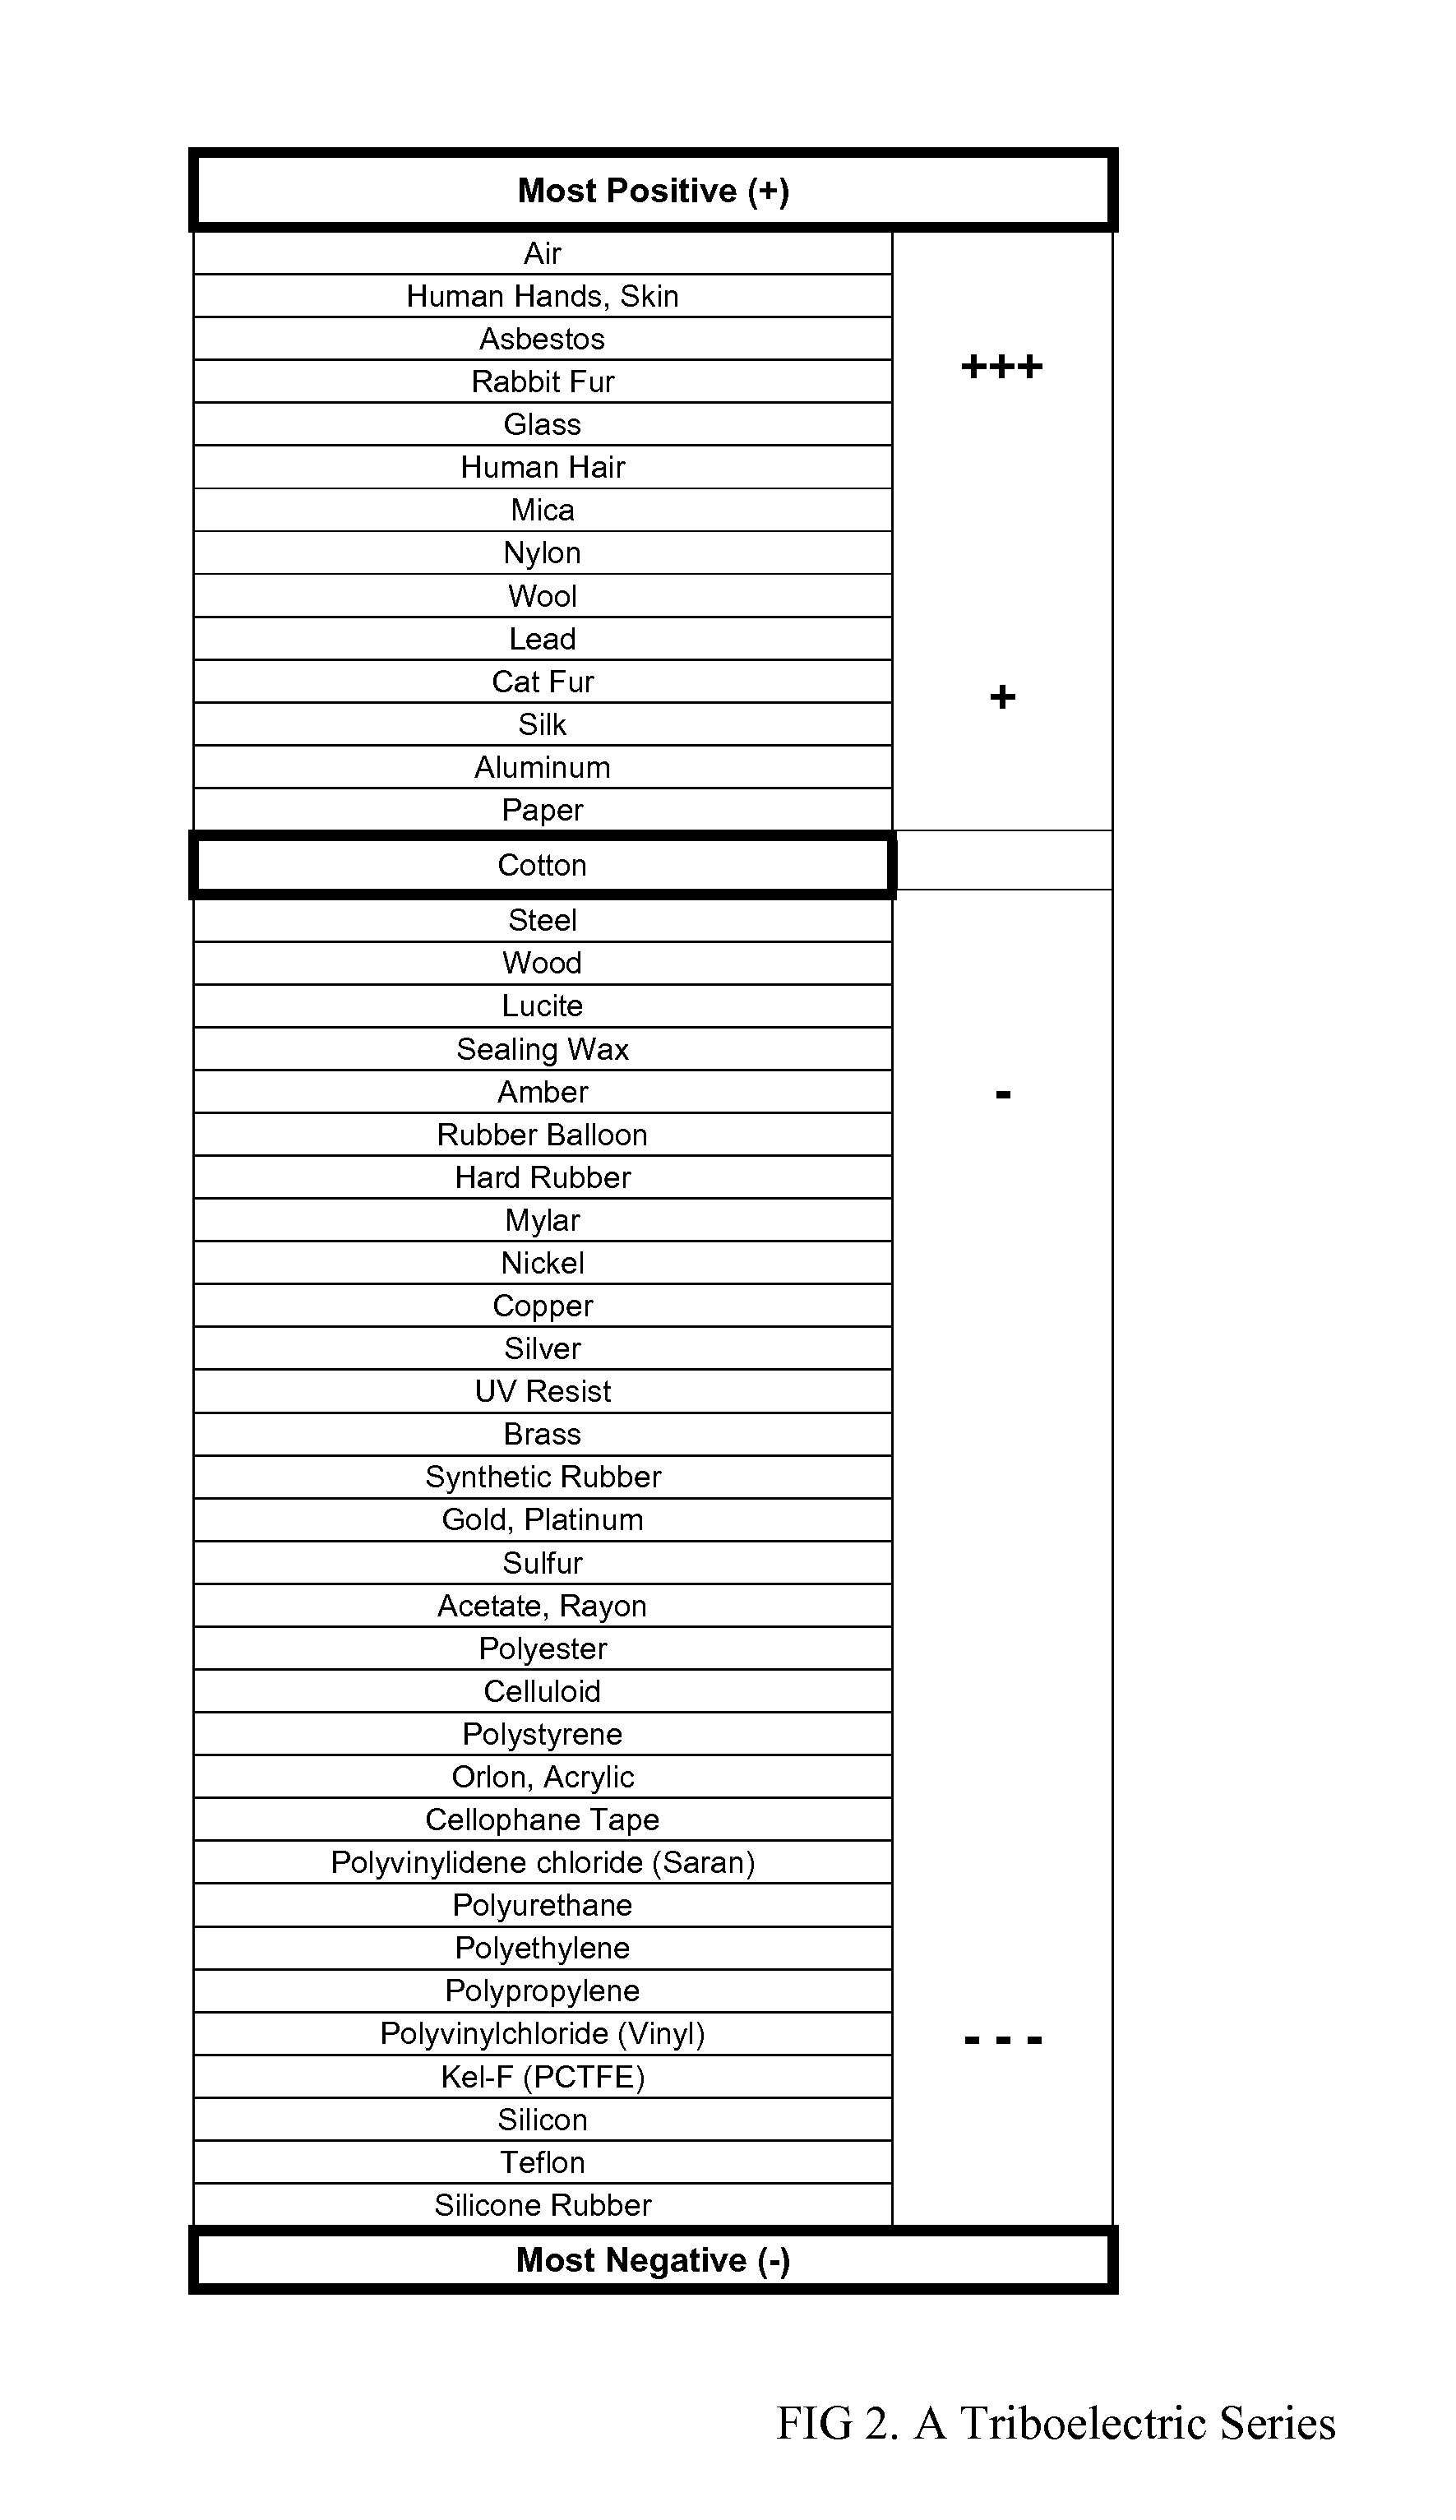 X-ray generation devices and methods